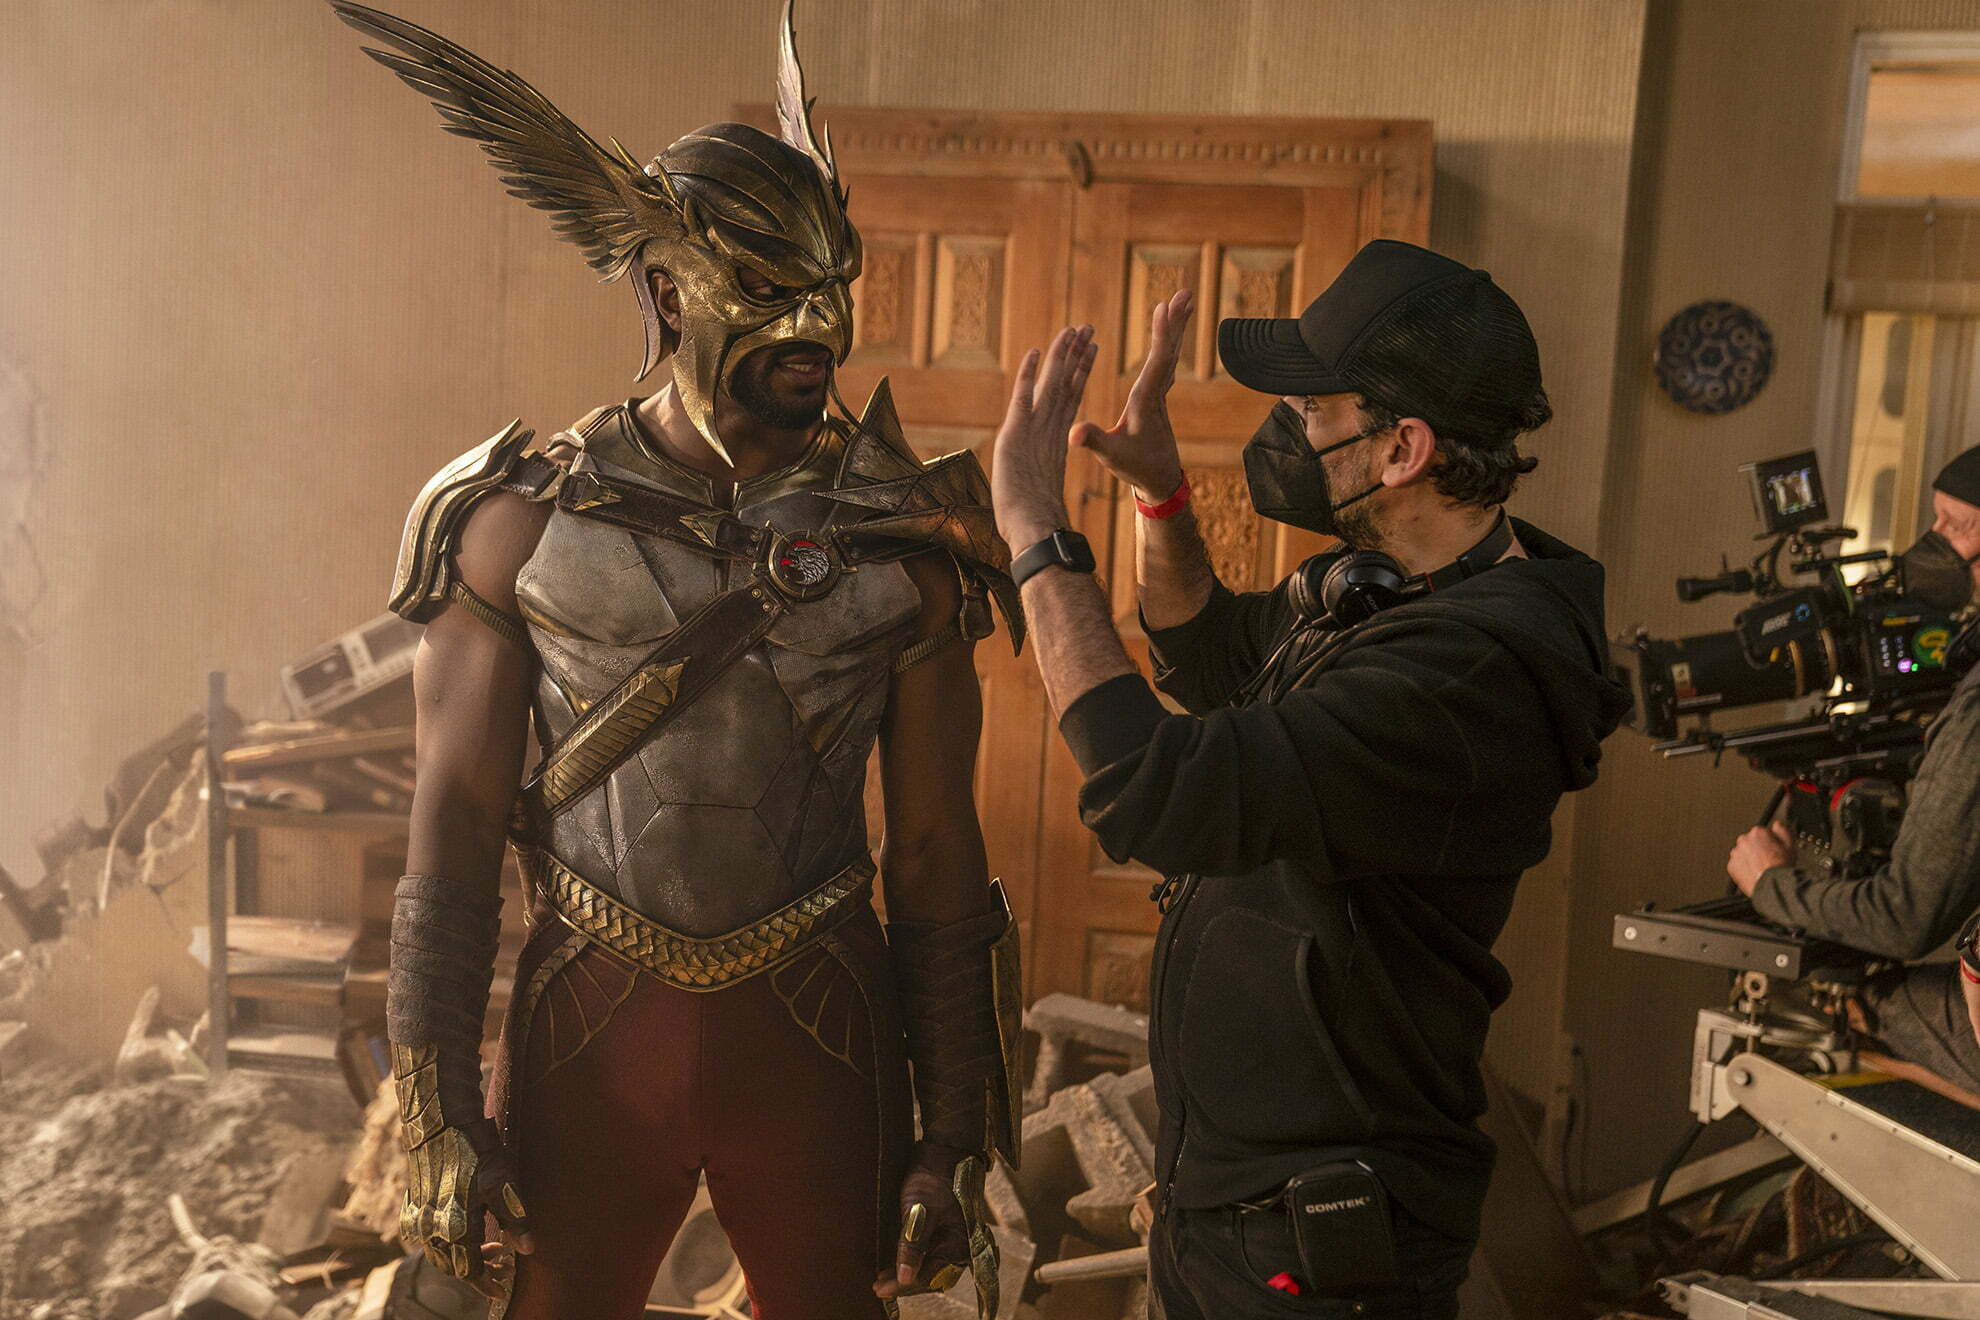 (L-r) ALDIS HODGE and Director JAUME COLLET-SERRA on the set of New Line Cinema’s action adventure “BLACK ADAM,” a Warner Bros. Pictures release.